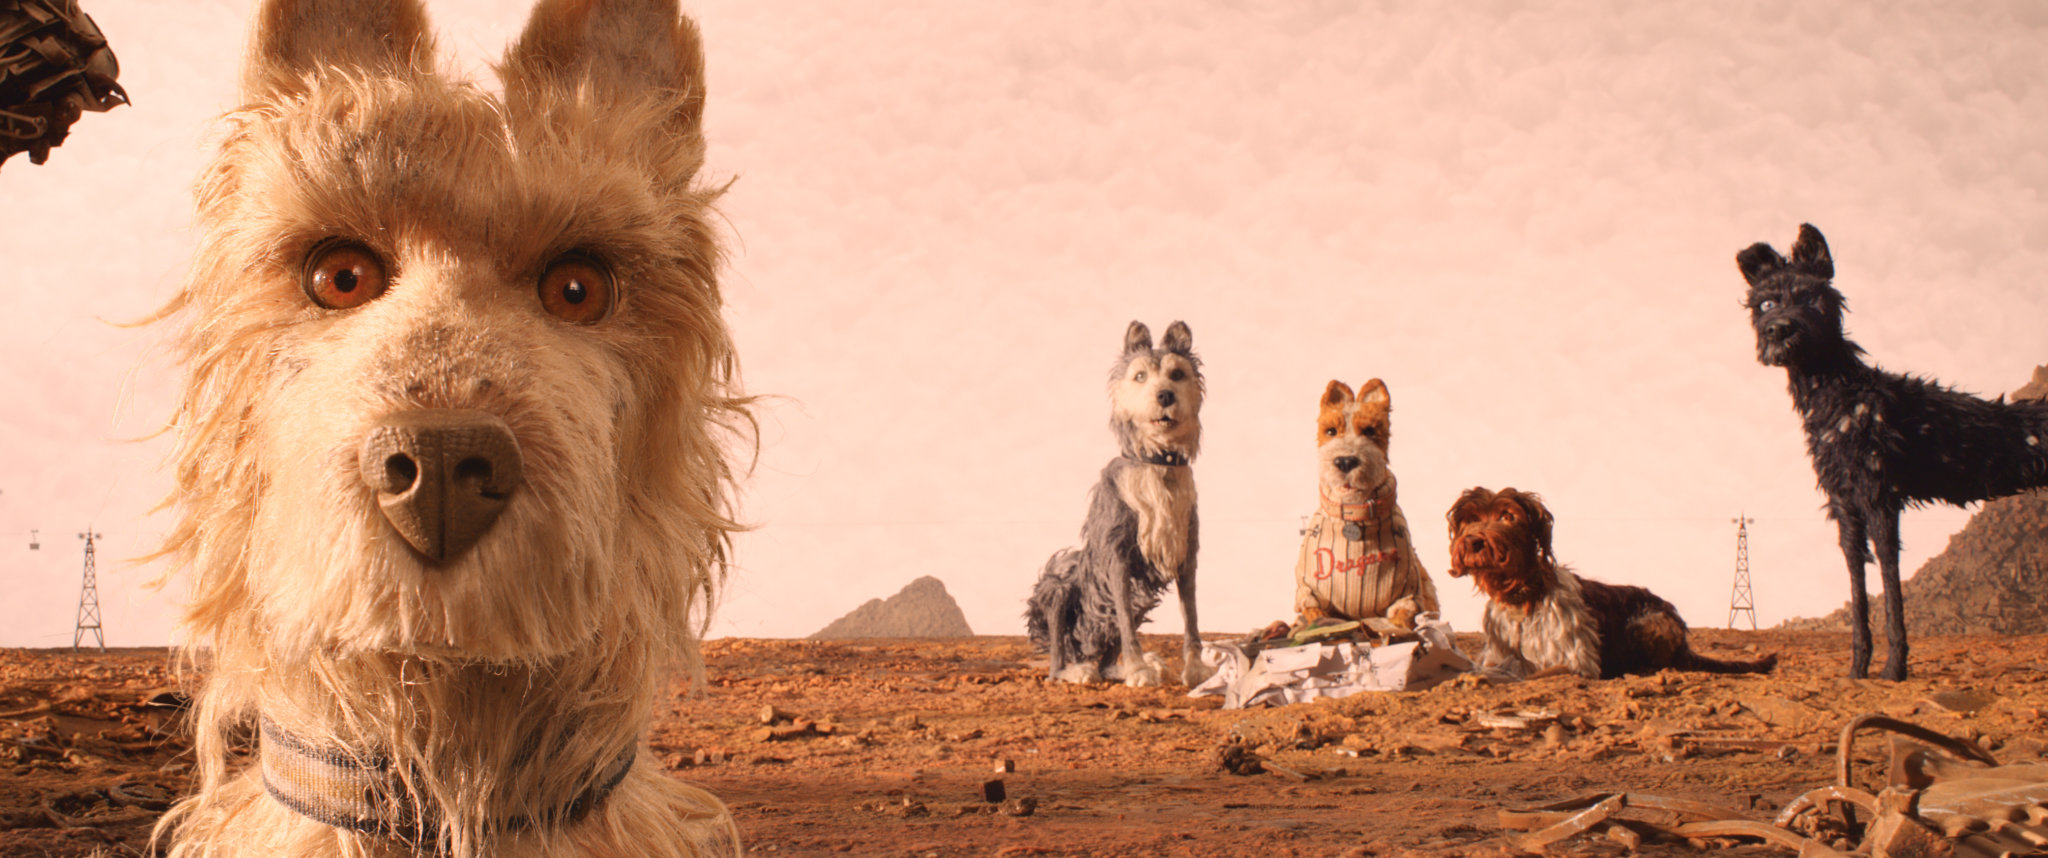 8 Best Wes Anderson Movies You Should Watch